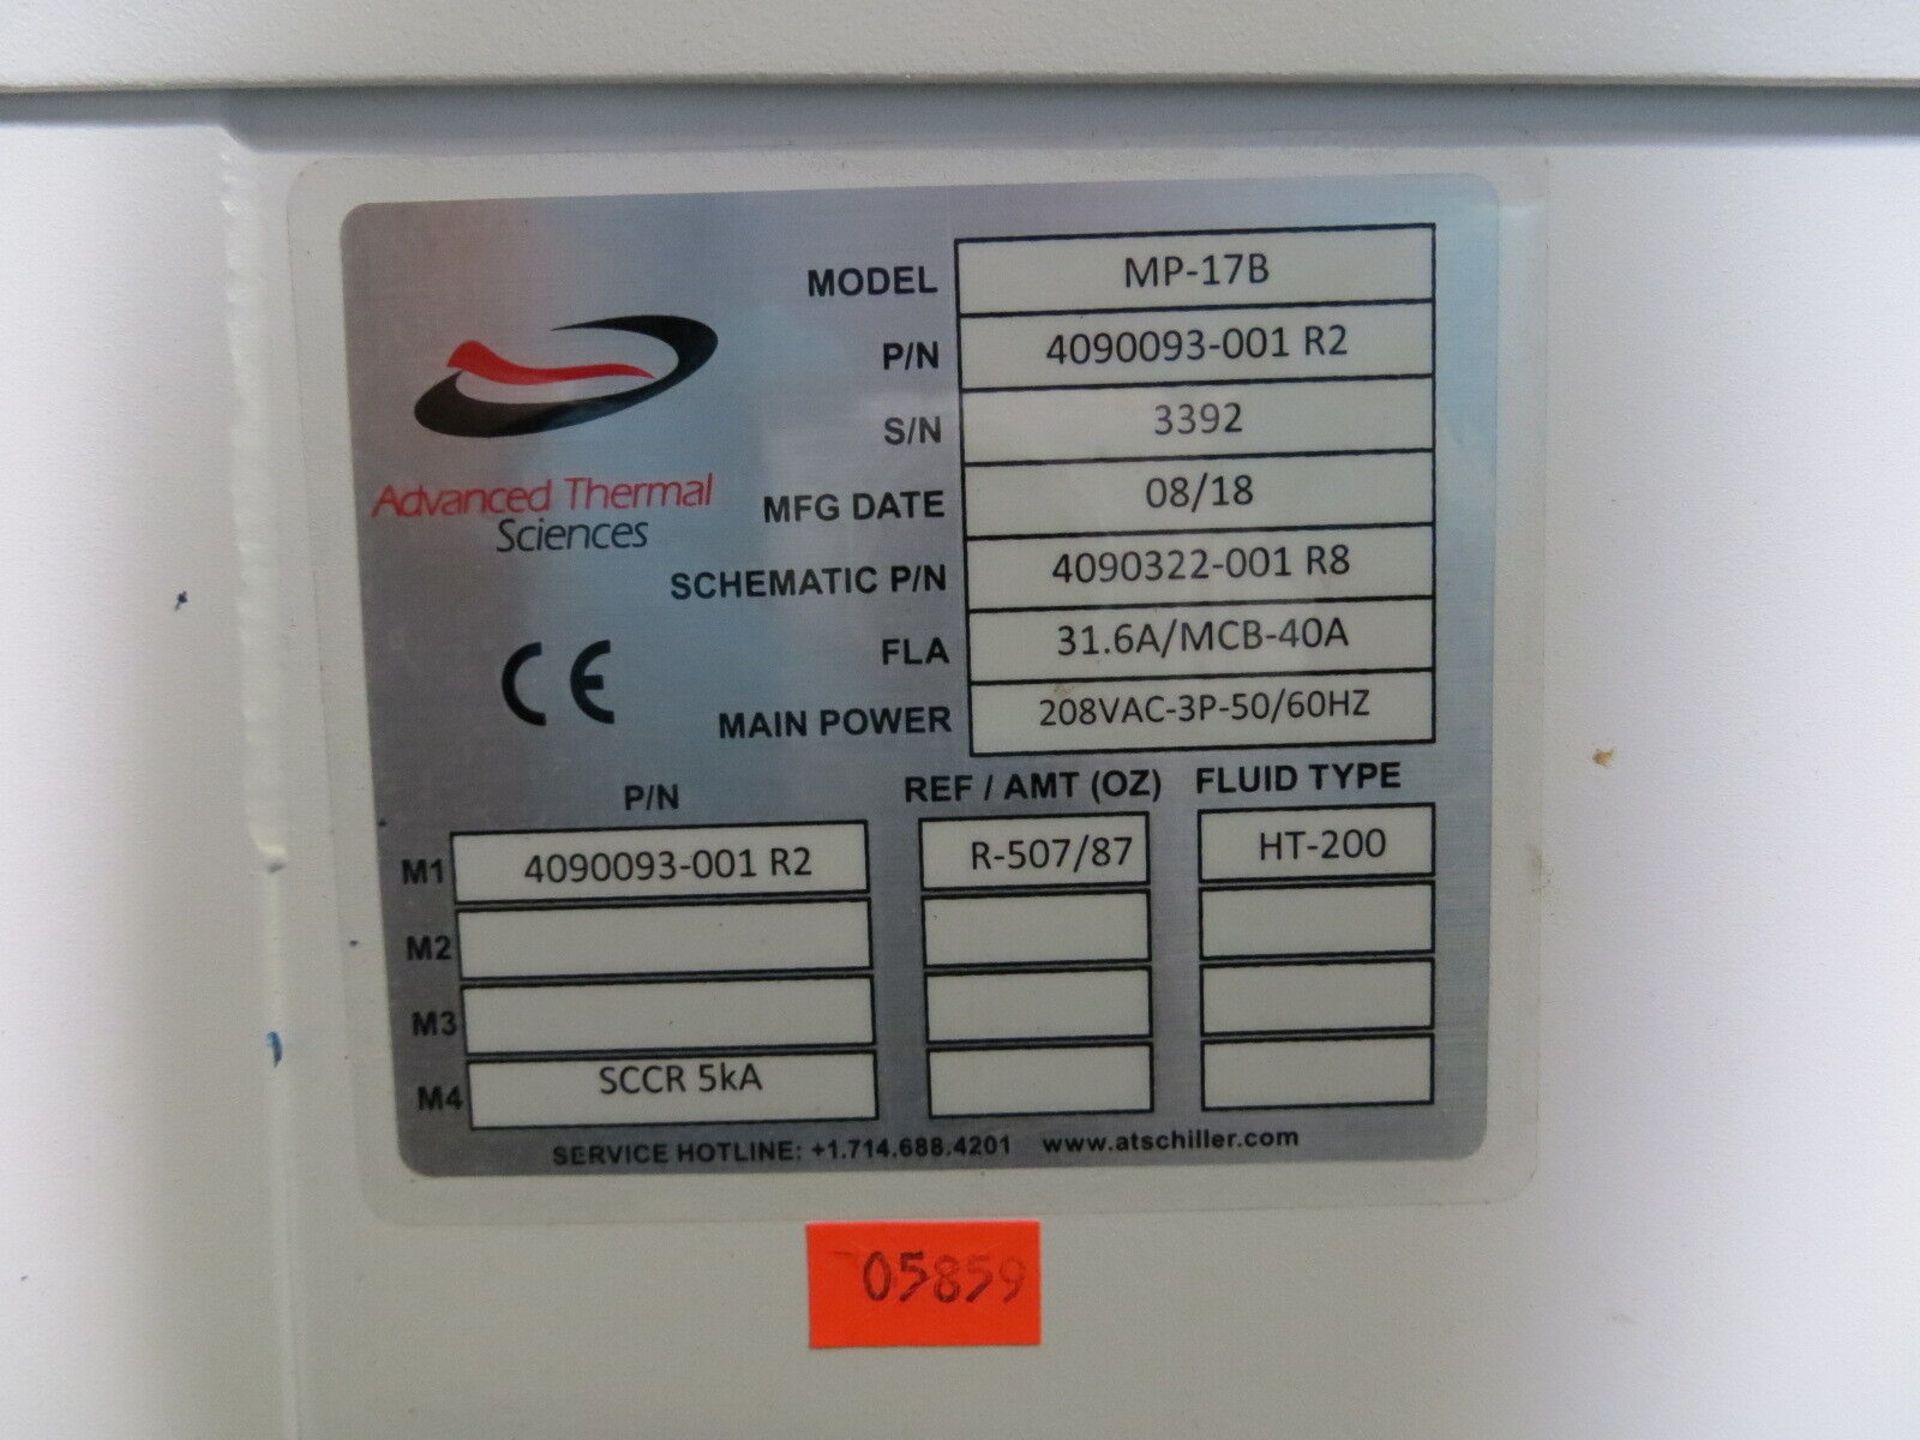 Advanced Thermal Sciences M-Pak MP-17B Chiller 4090093-001 R2 - Gilroy - Image 9 of 10